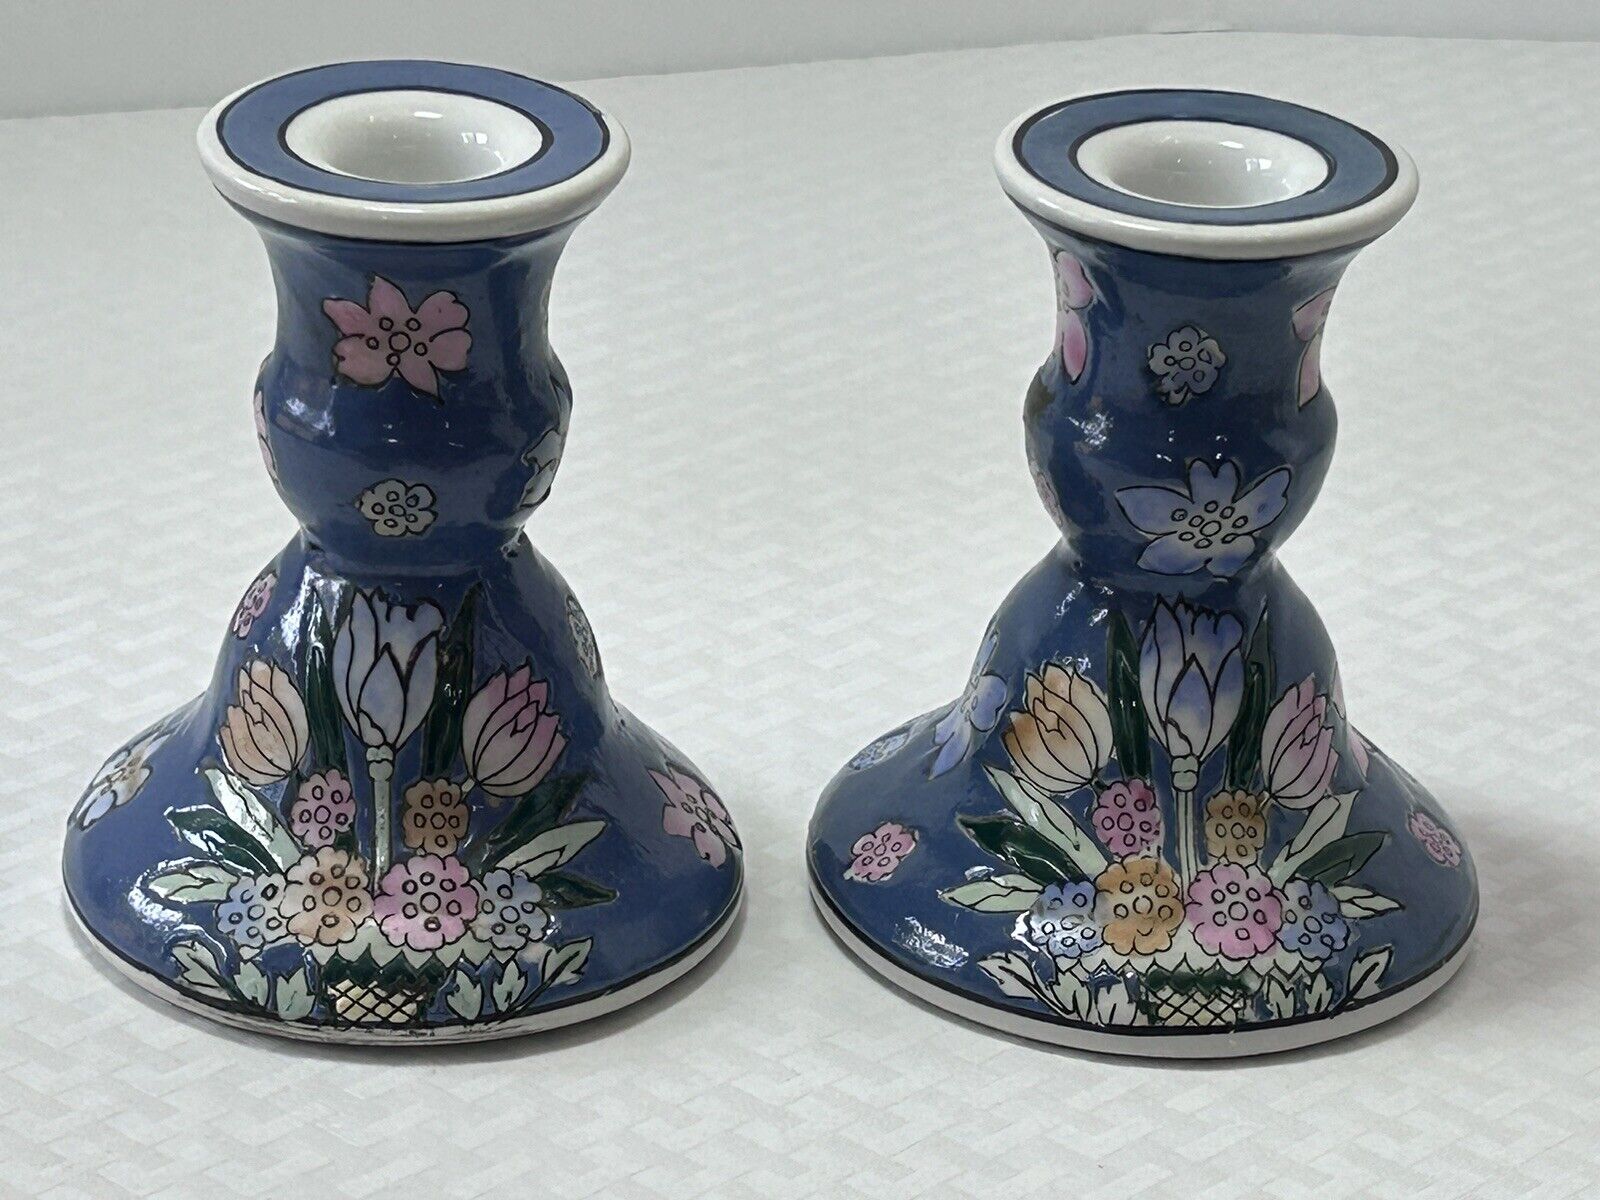 1 Pair Handcrafted Ceramic Country Folk Art  Blue Floral Candle Holders Vintage